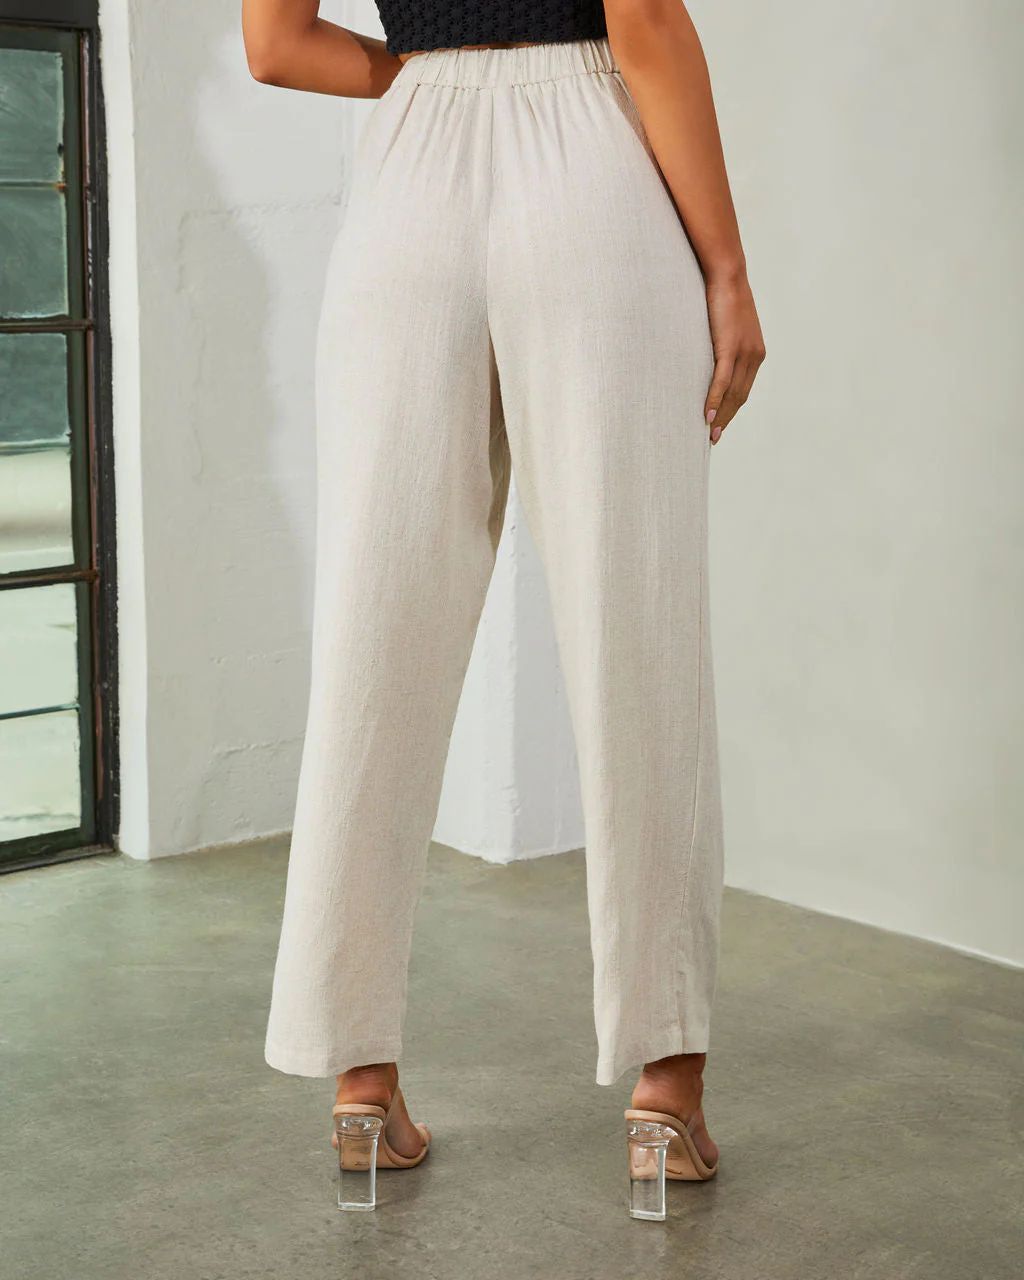 Renton Linen High Rise Pocketed Pants | VICI Collection